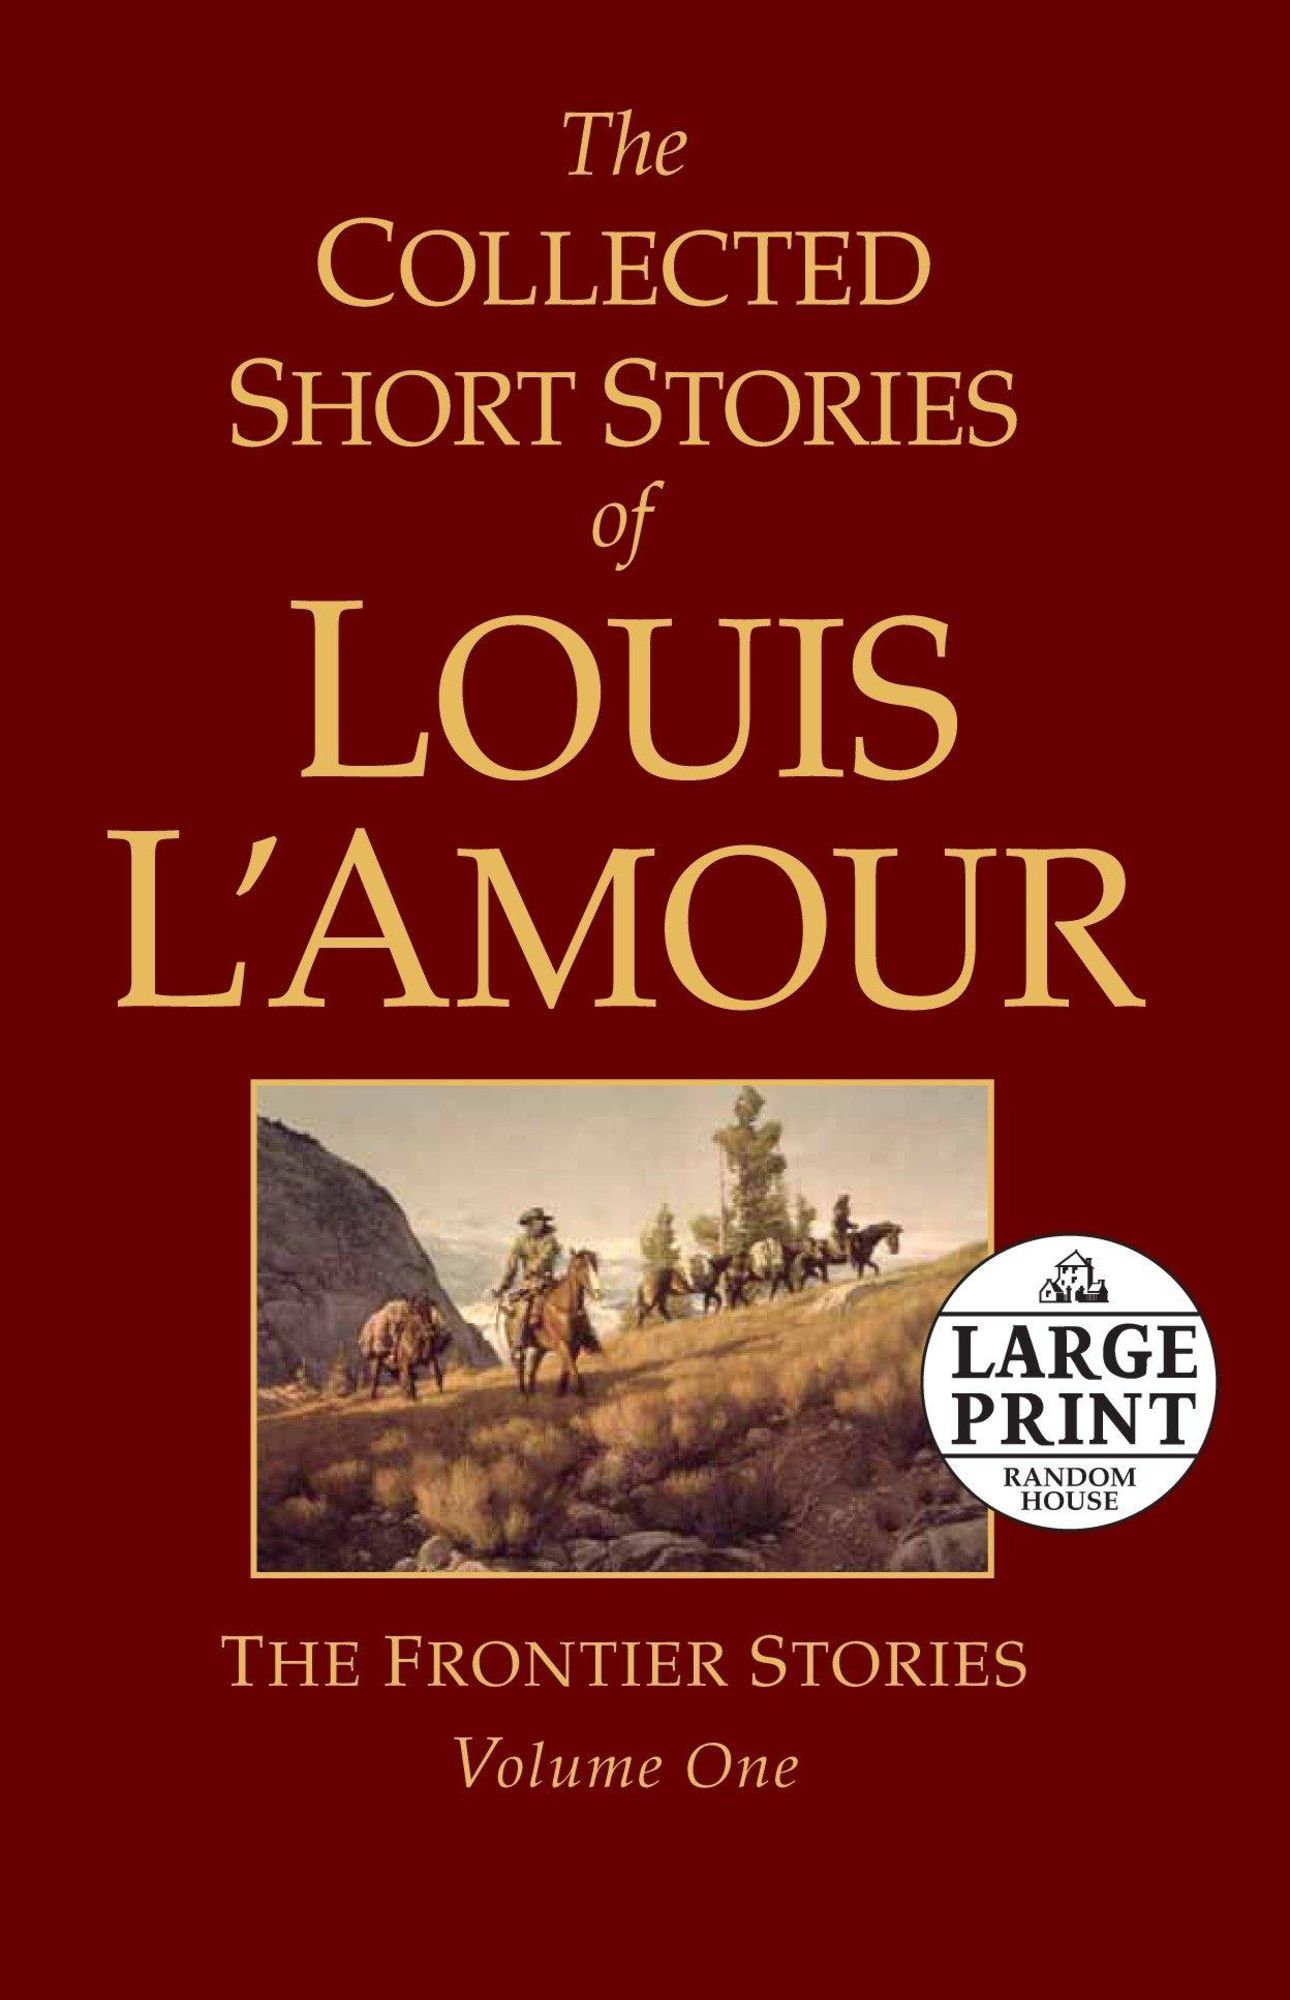 The Collected Short Stories of Louis L'Amour: Unabridged Selections From  The Frontier Stories, Volume 5 (Large Print / Paperback)